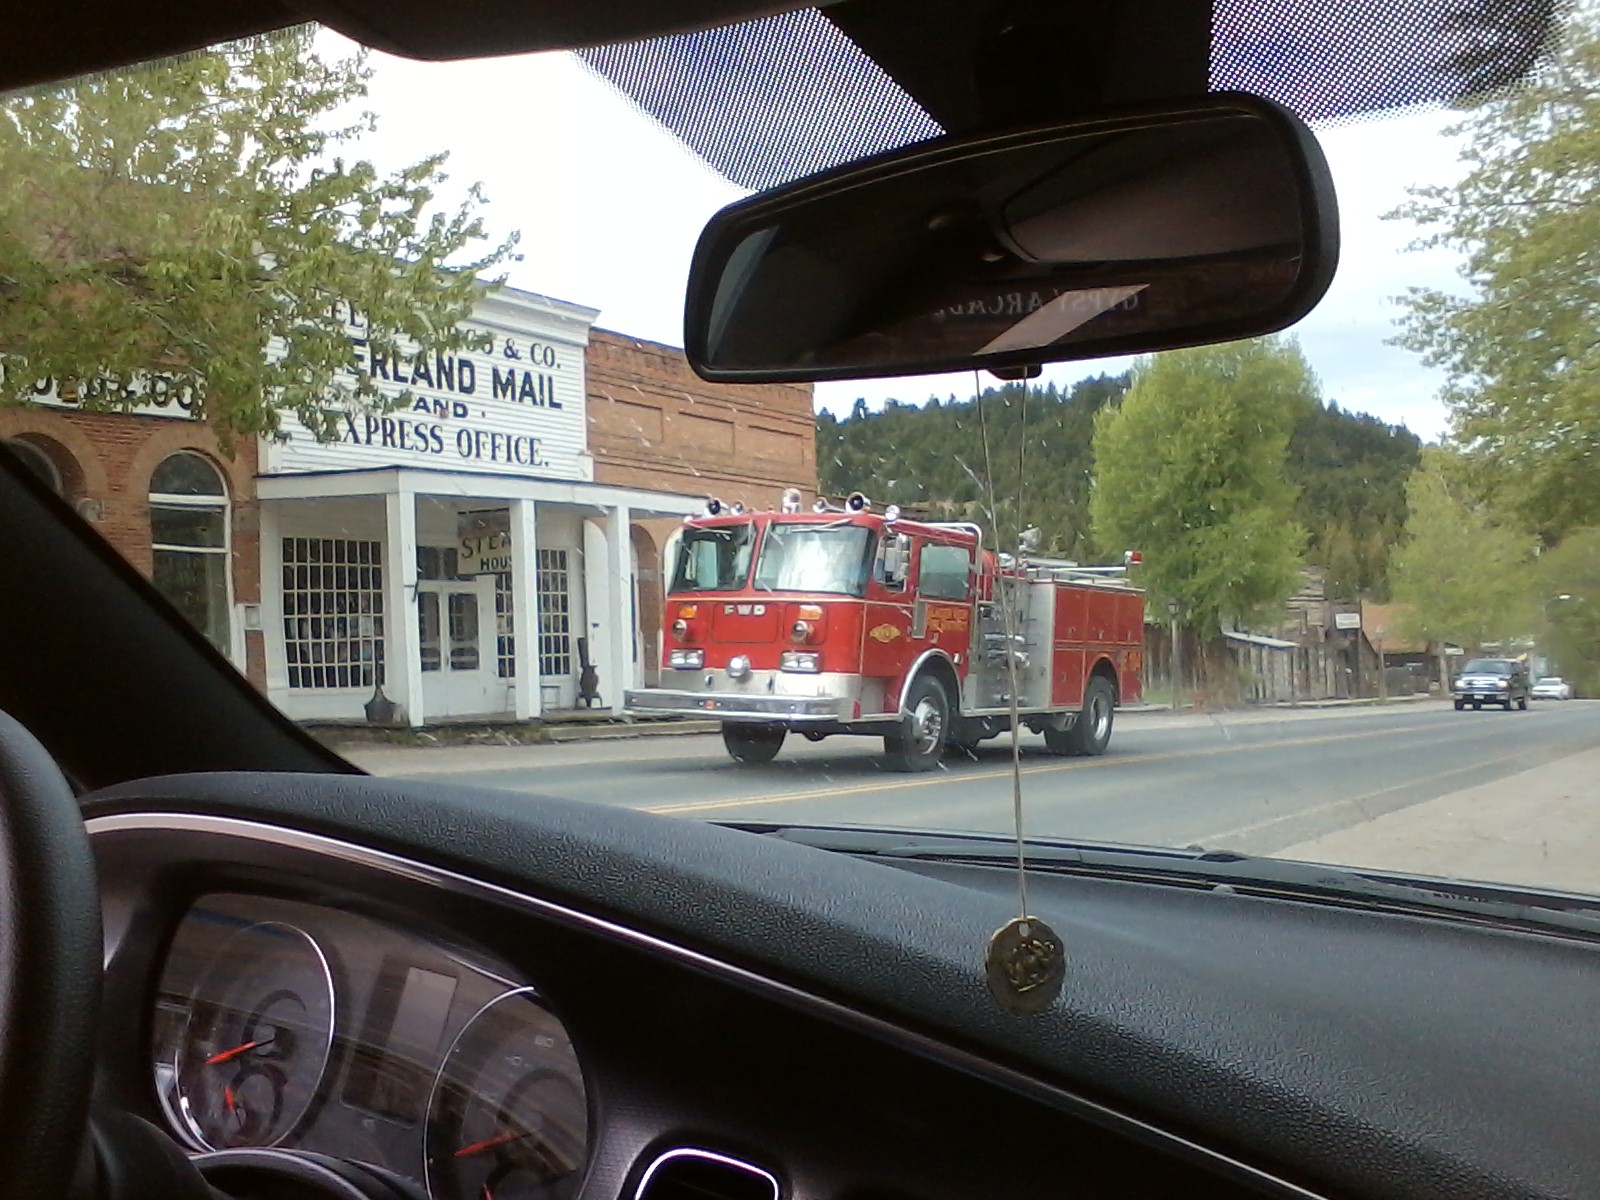 cool old firetruck in virginia city montana